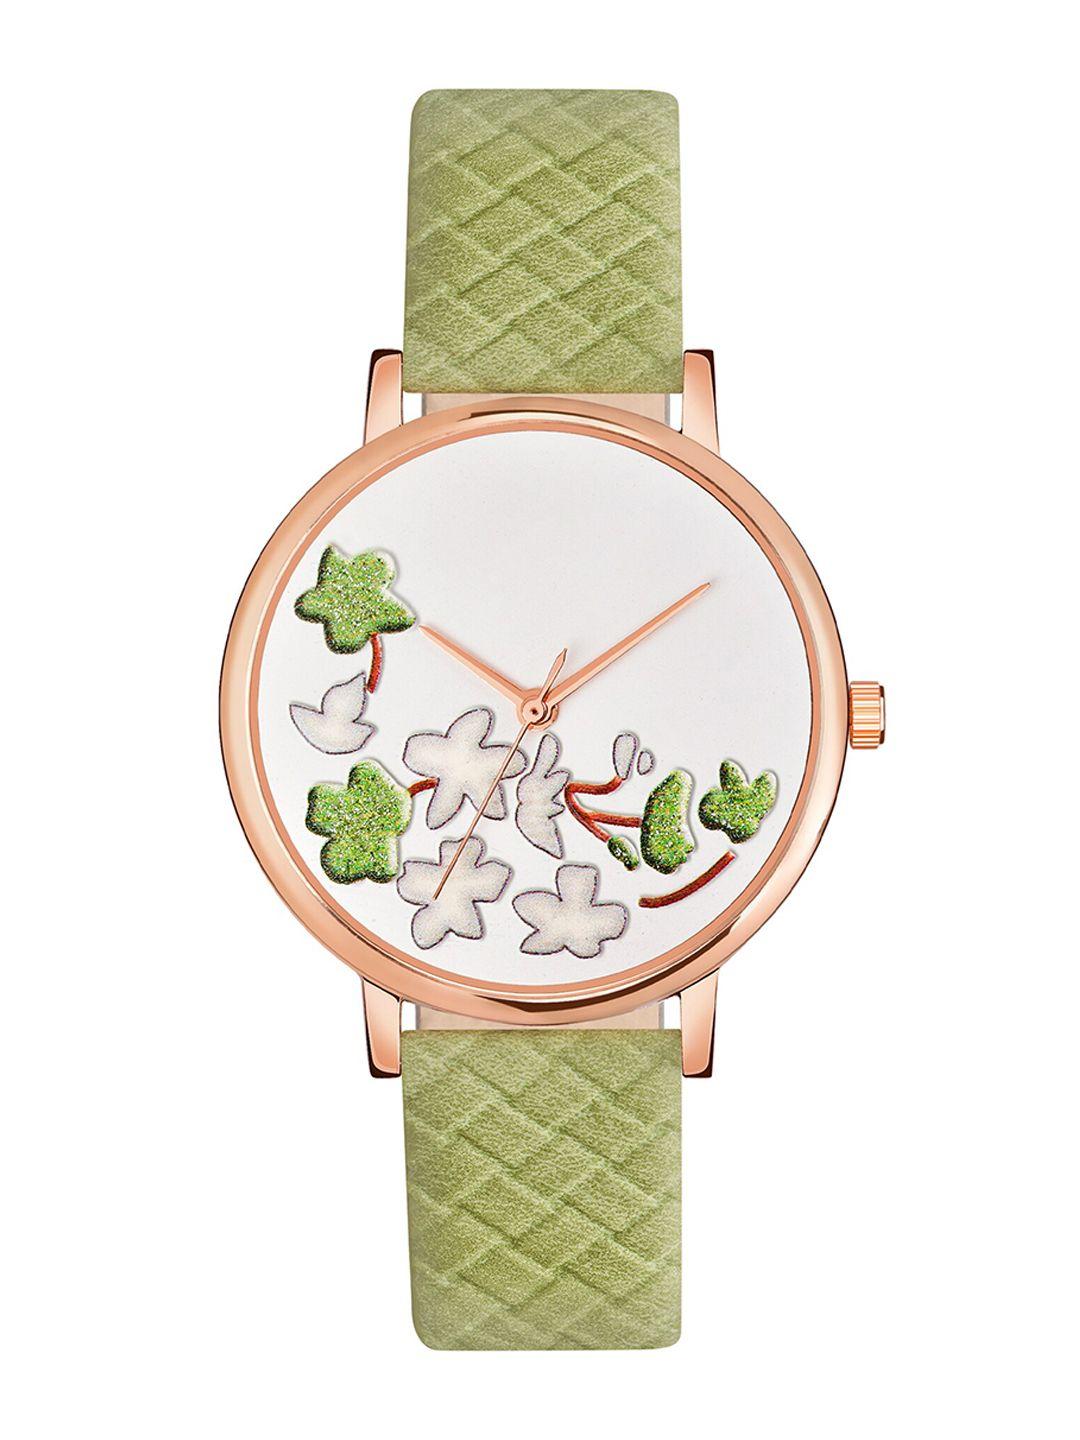 shocknshop-women-white-printed-dial-&-green-leather-straps-analogue-watch-mt501